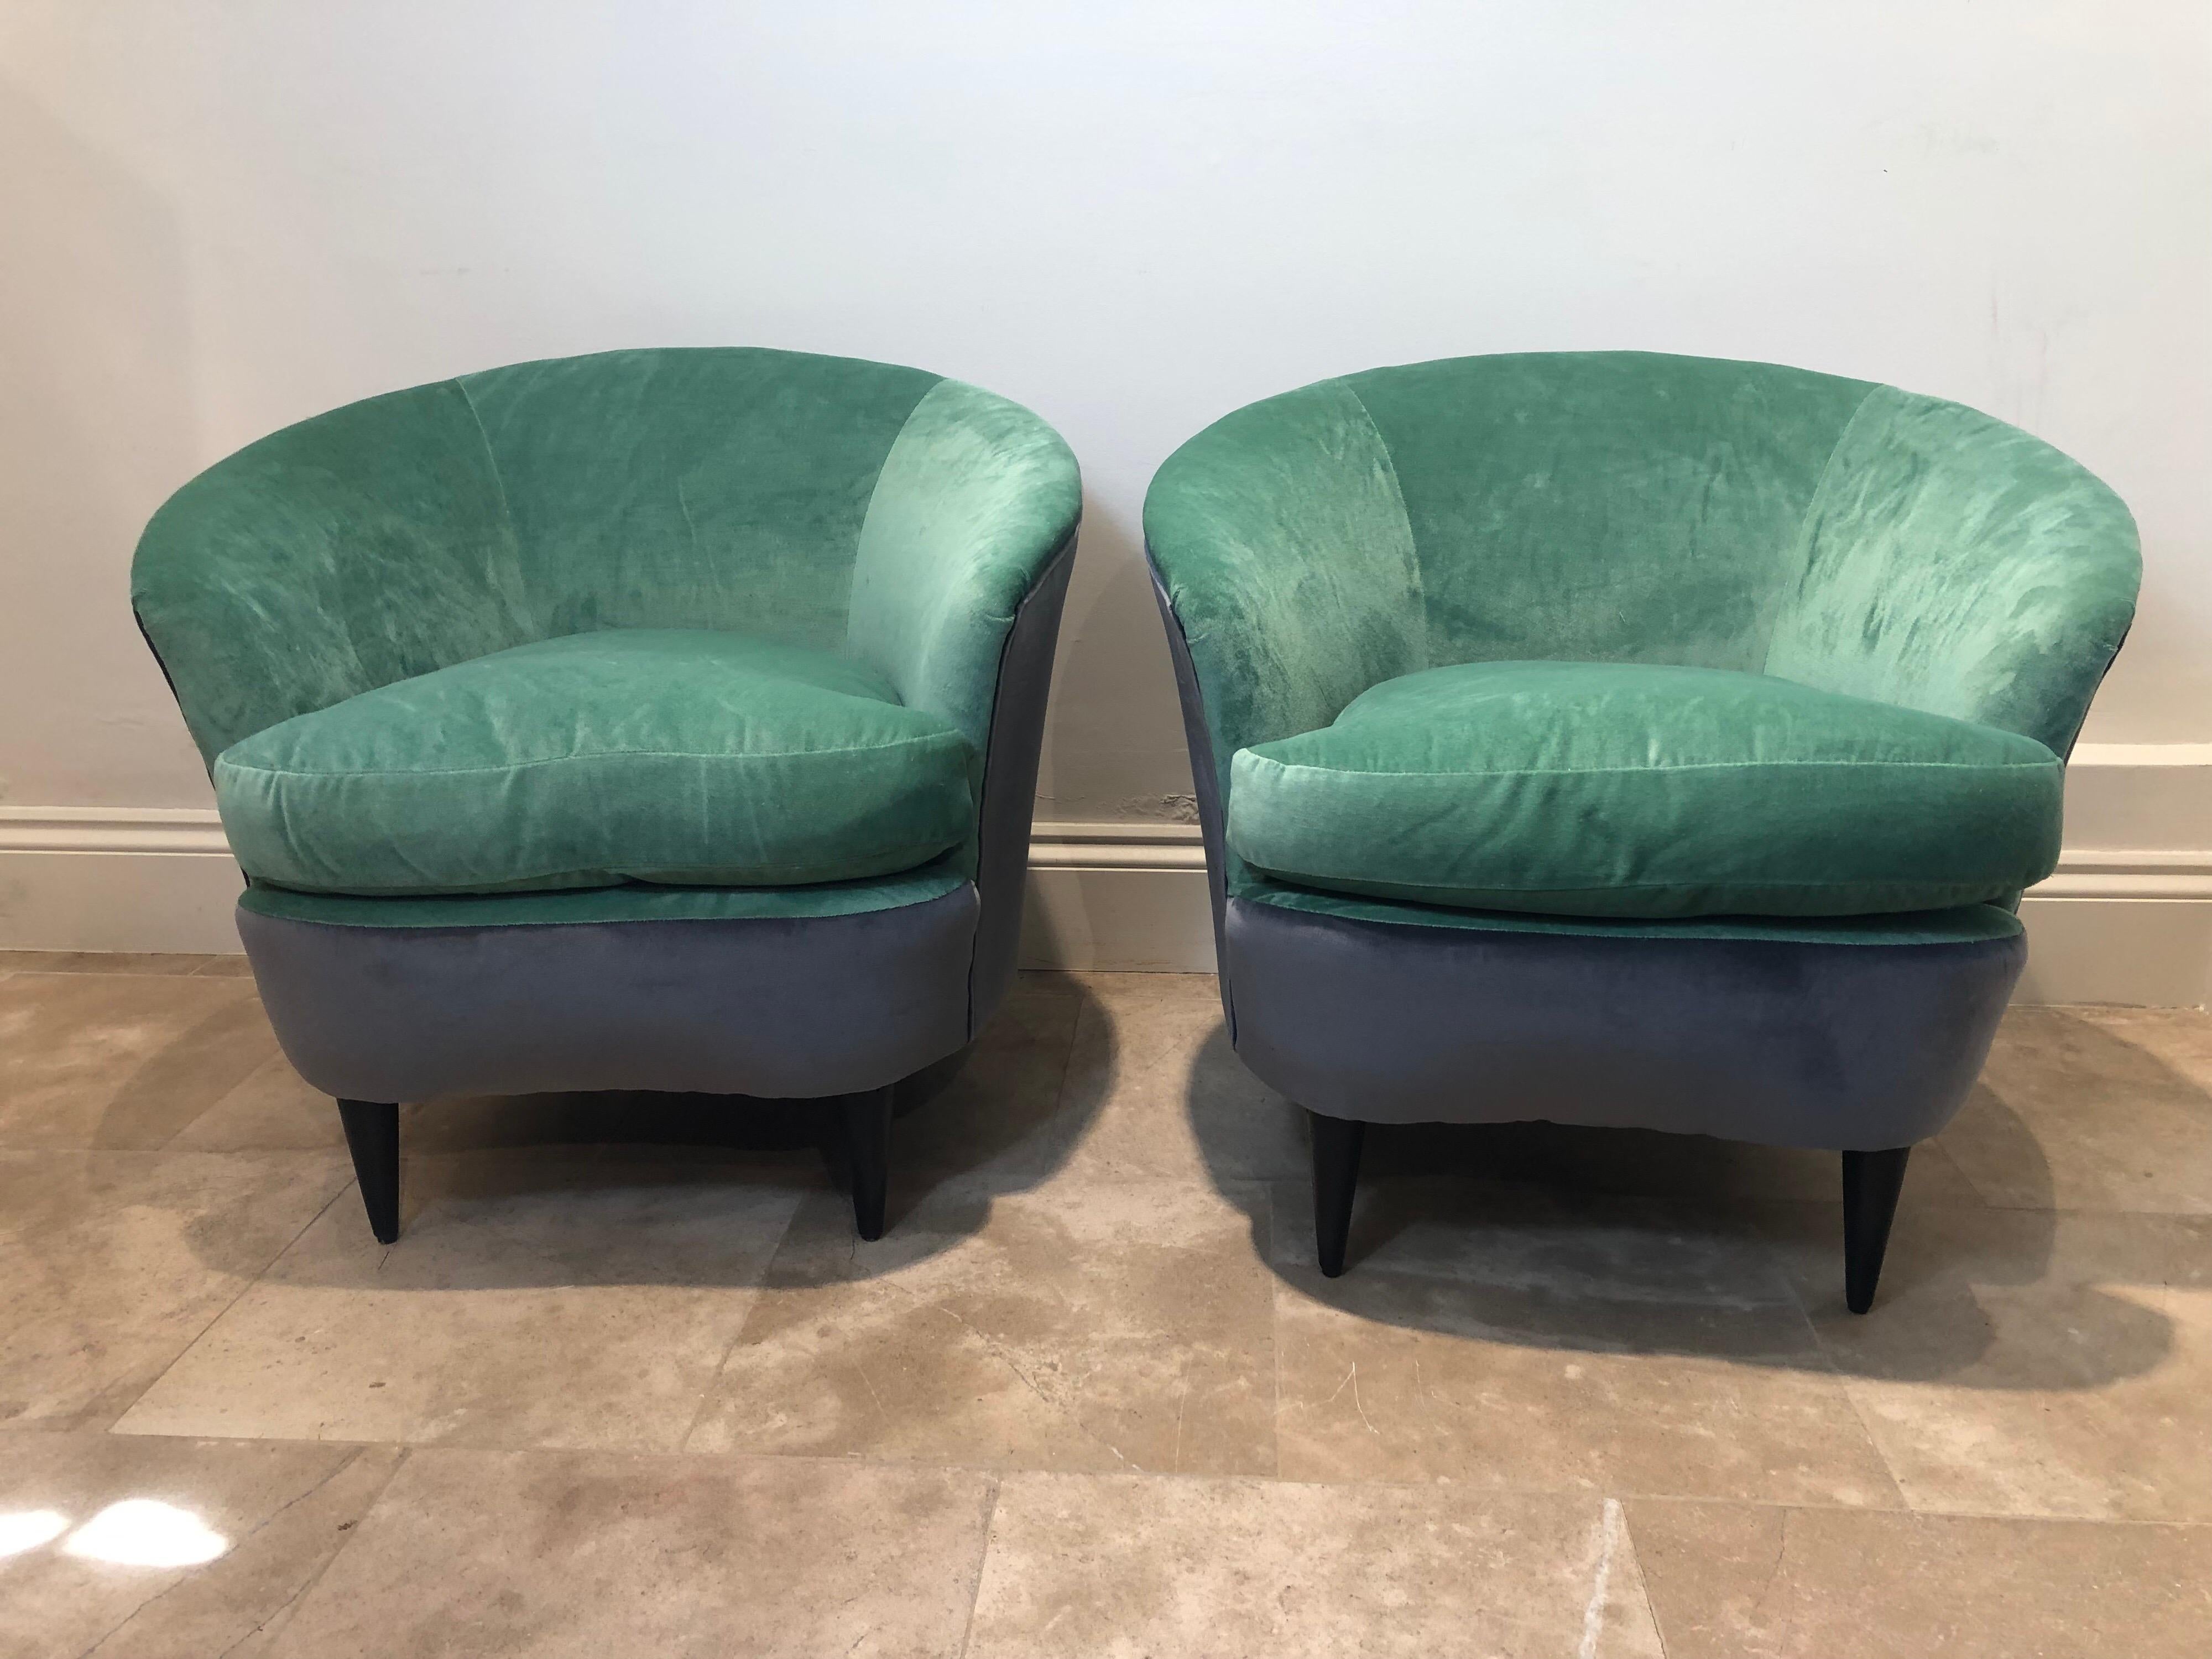 Pair of Italian Curved Chairs and Stools with Mint Green and Grey Upholstery For Sale 5